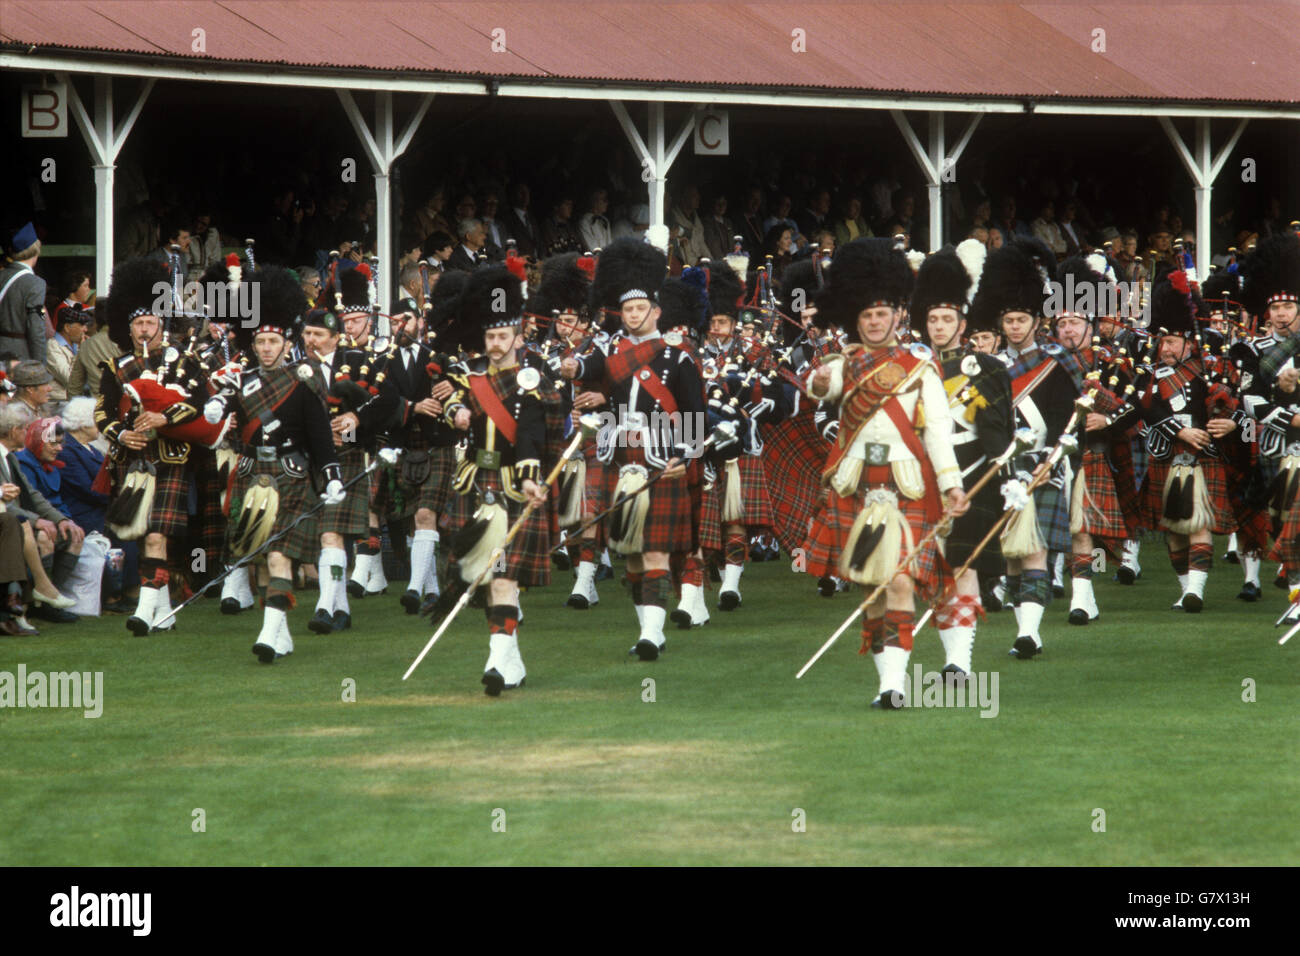 Tartan kilts of various clans provide a blaze of colour as the Massed Bands Display gets under way. Stock Photo